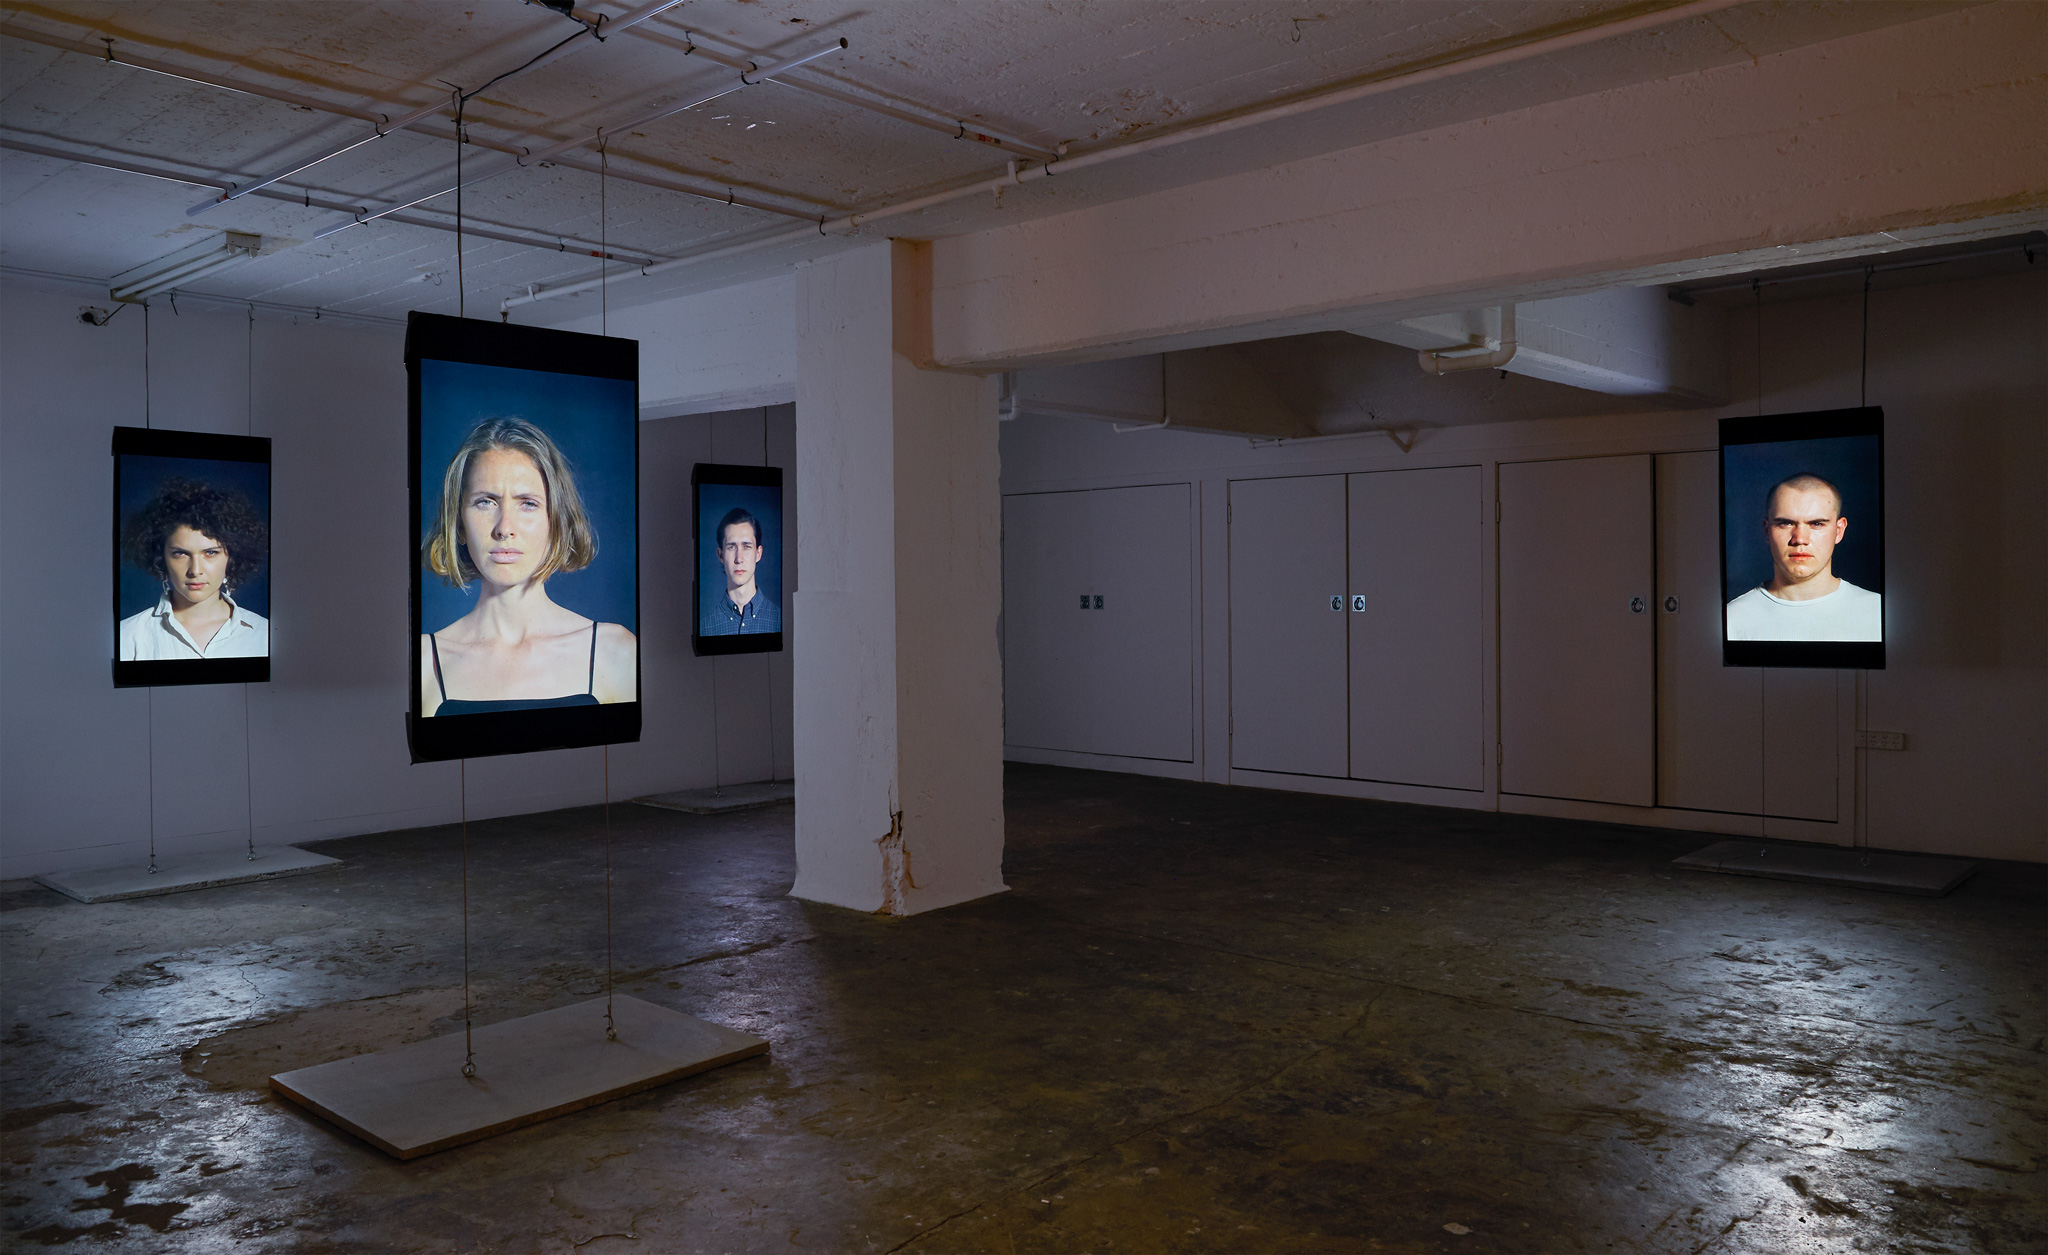 <p><i>Flash Portraits</i>, 2018, 5 channel installation, vertically orientated LCD screens, 1200 x 700mm, Installation View, DownUnder Gallery 2018</p>